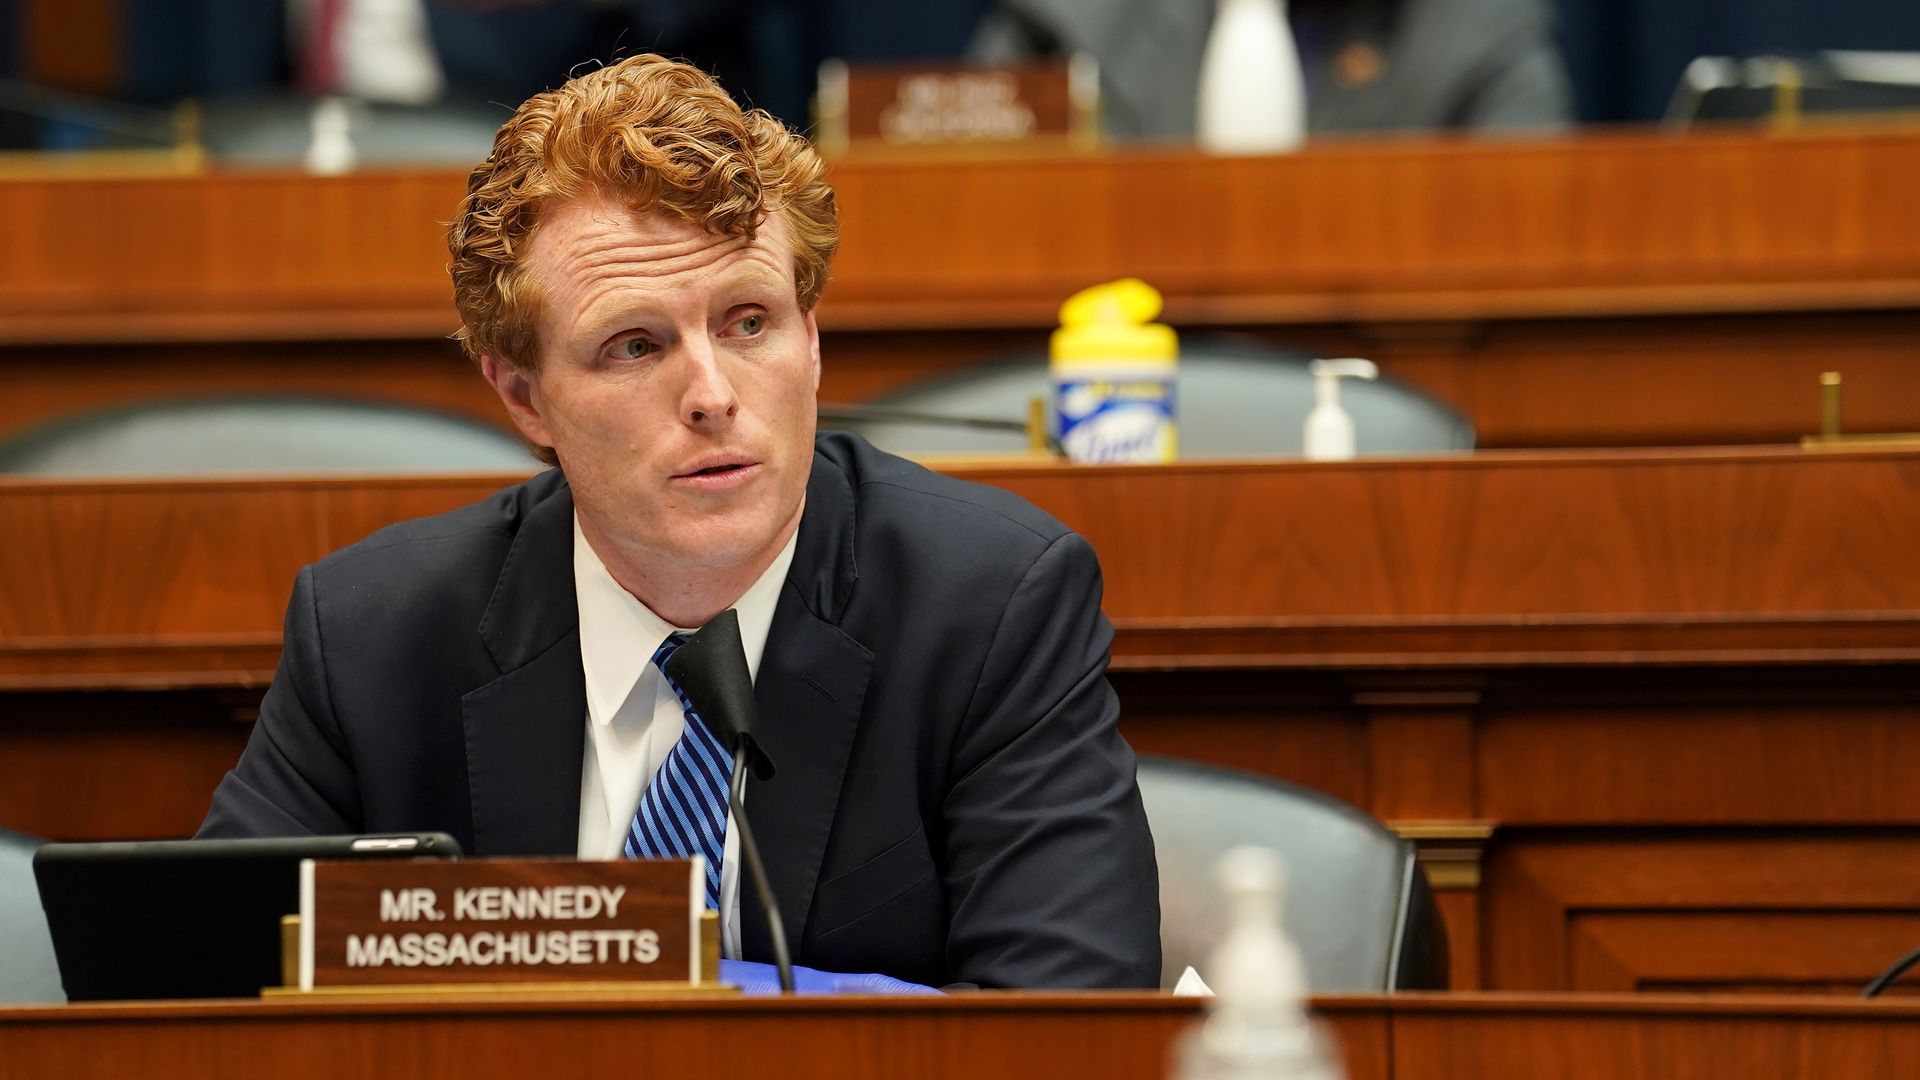 Rep. Joseph P. Kennedy III is shown this past May during a hearing in the House.